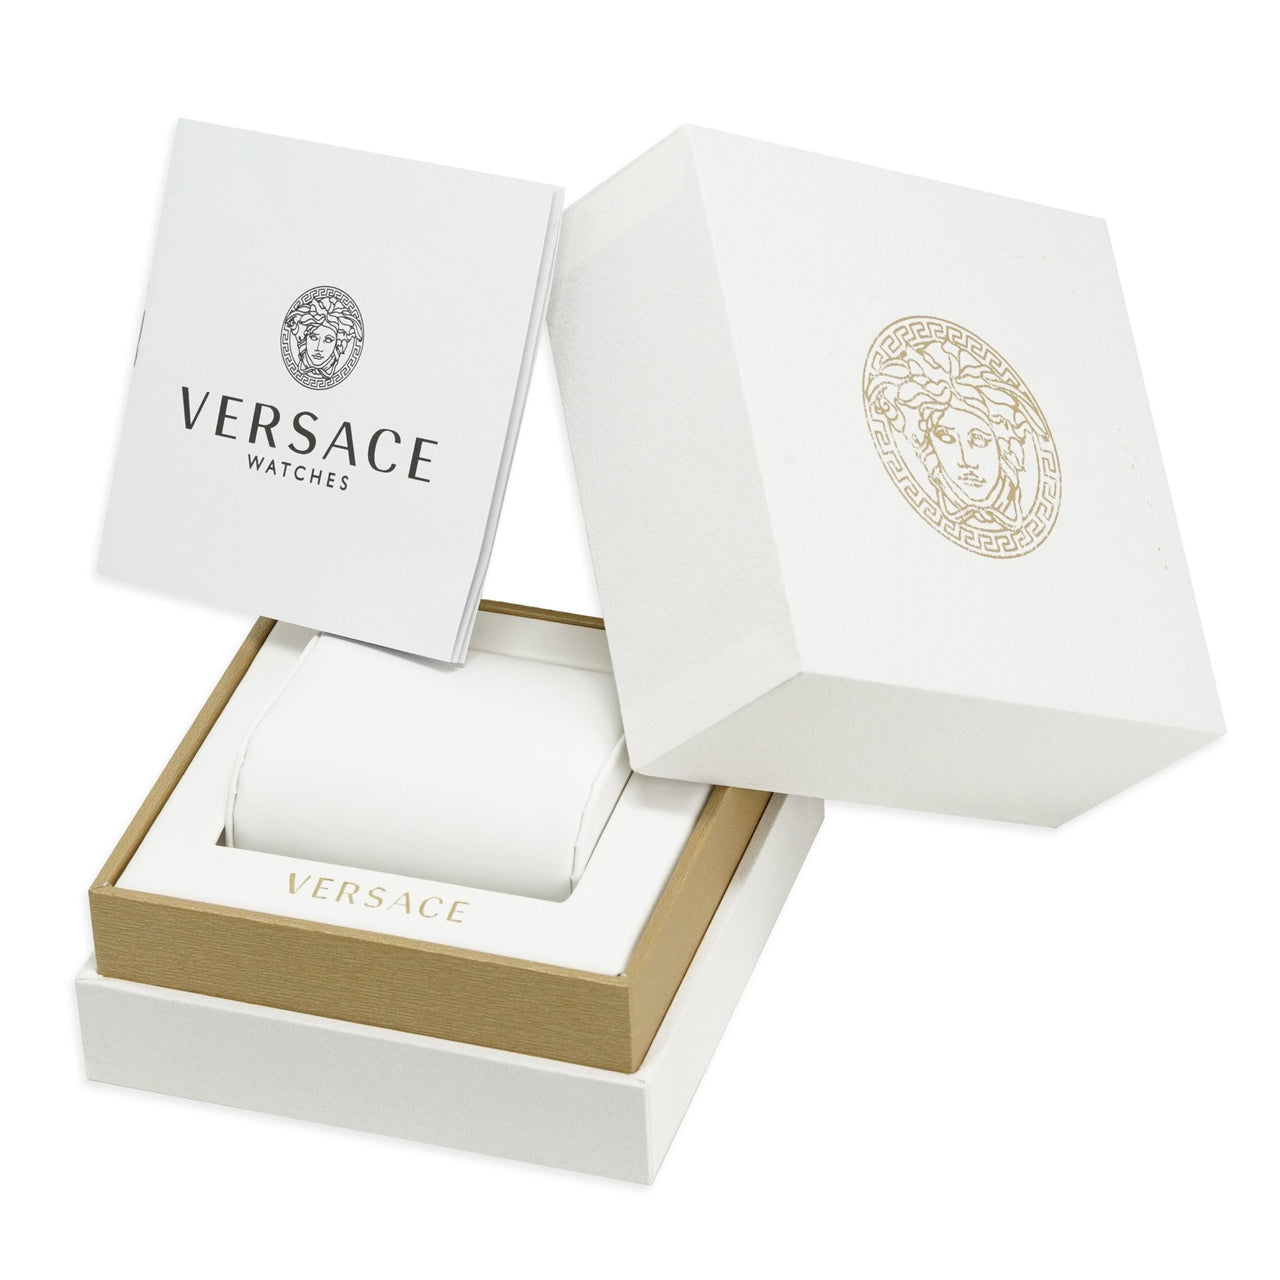 Versace Men's Watch Chain Reaction Black VEDY00719 - Watches & Crystals